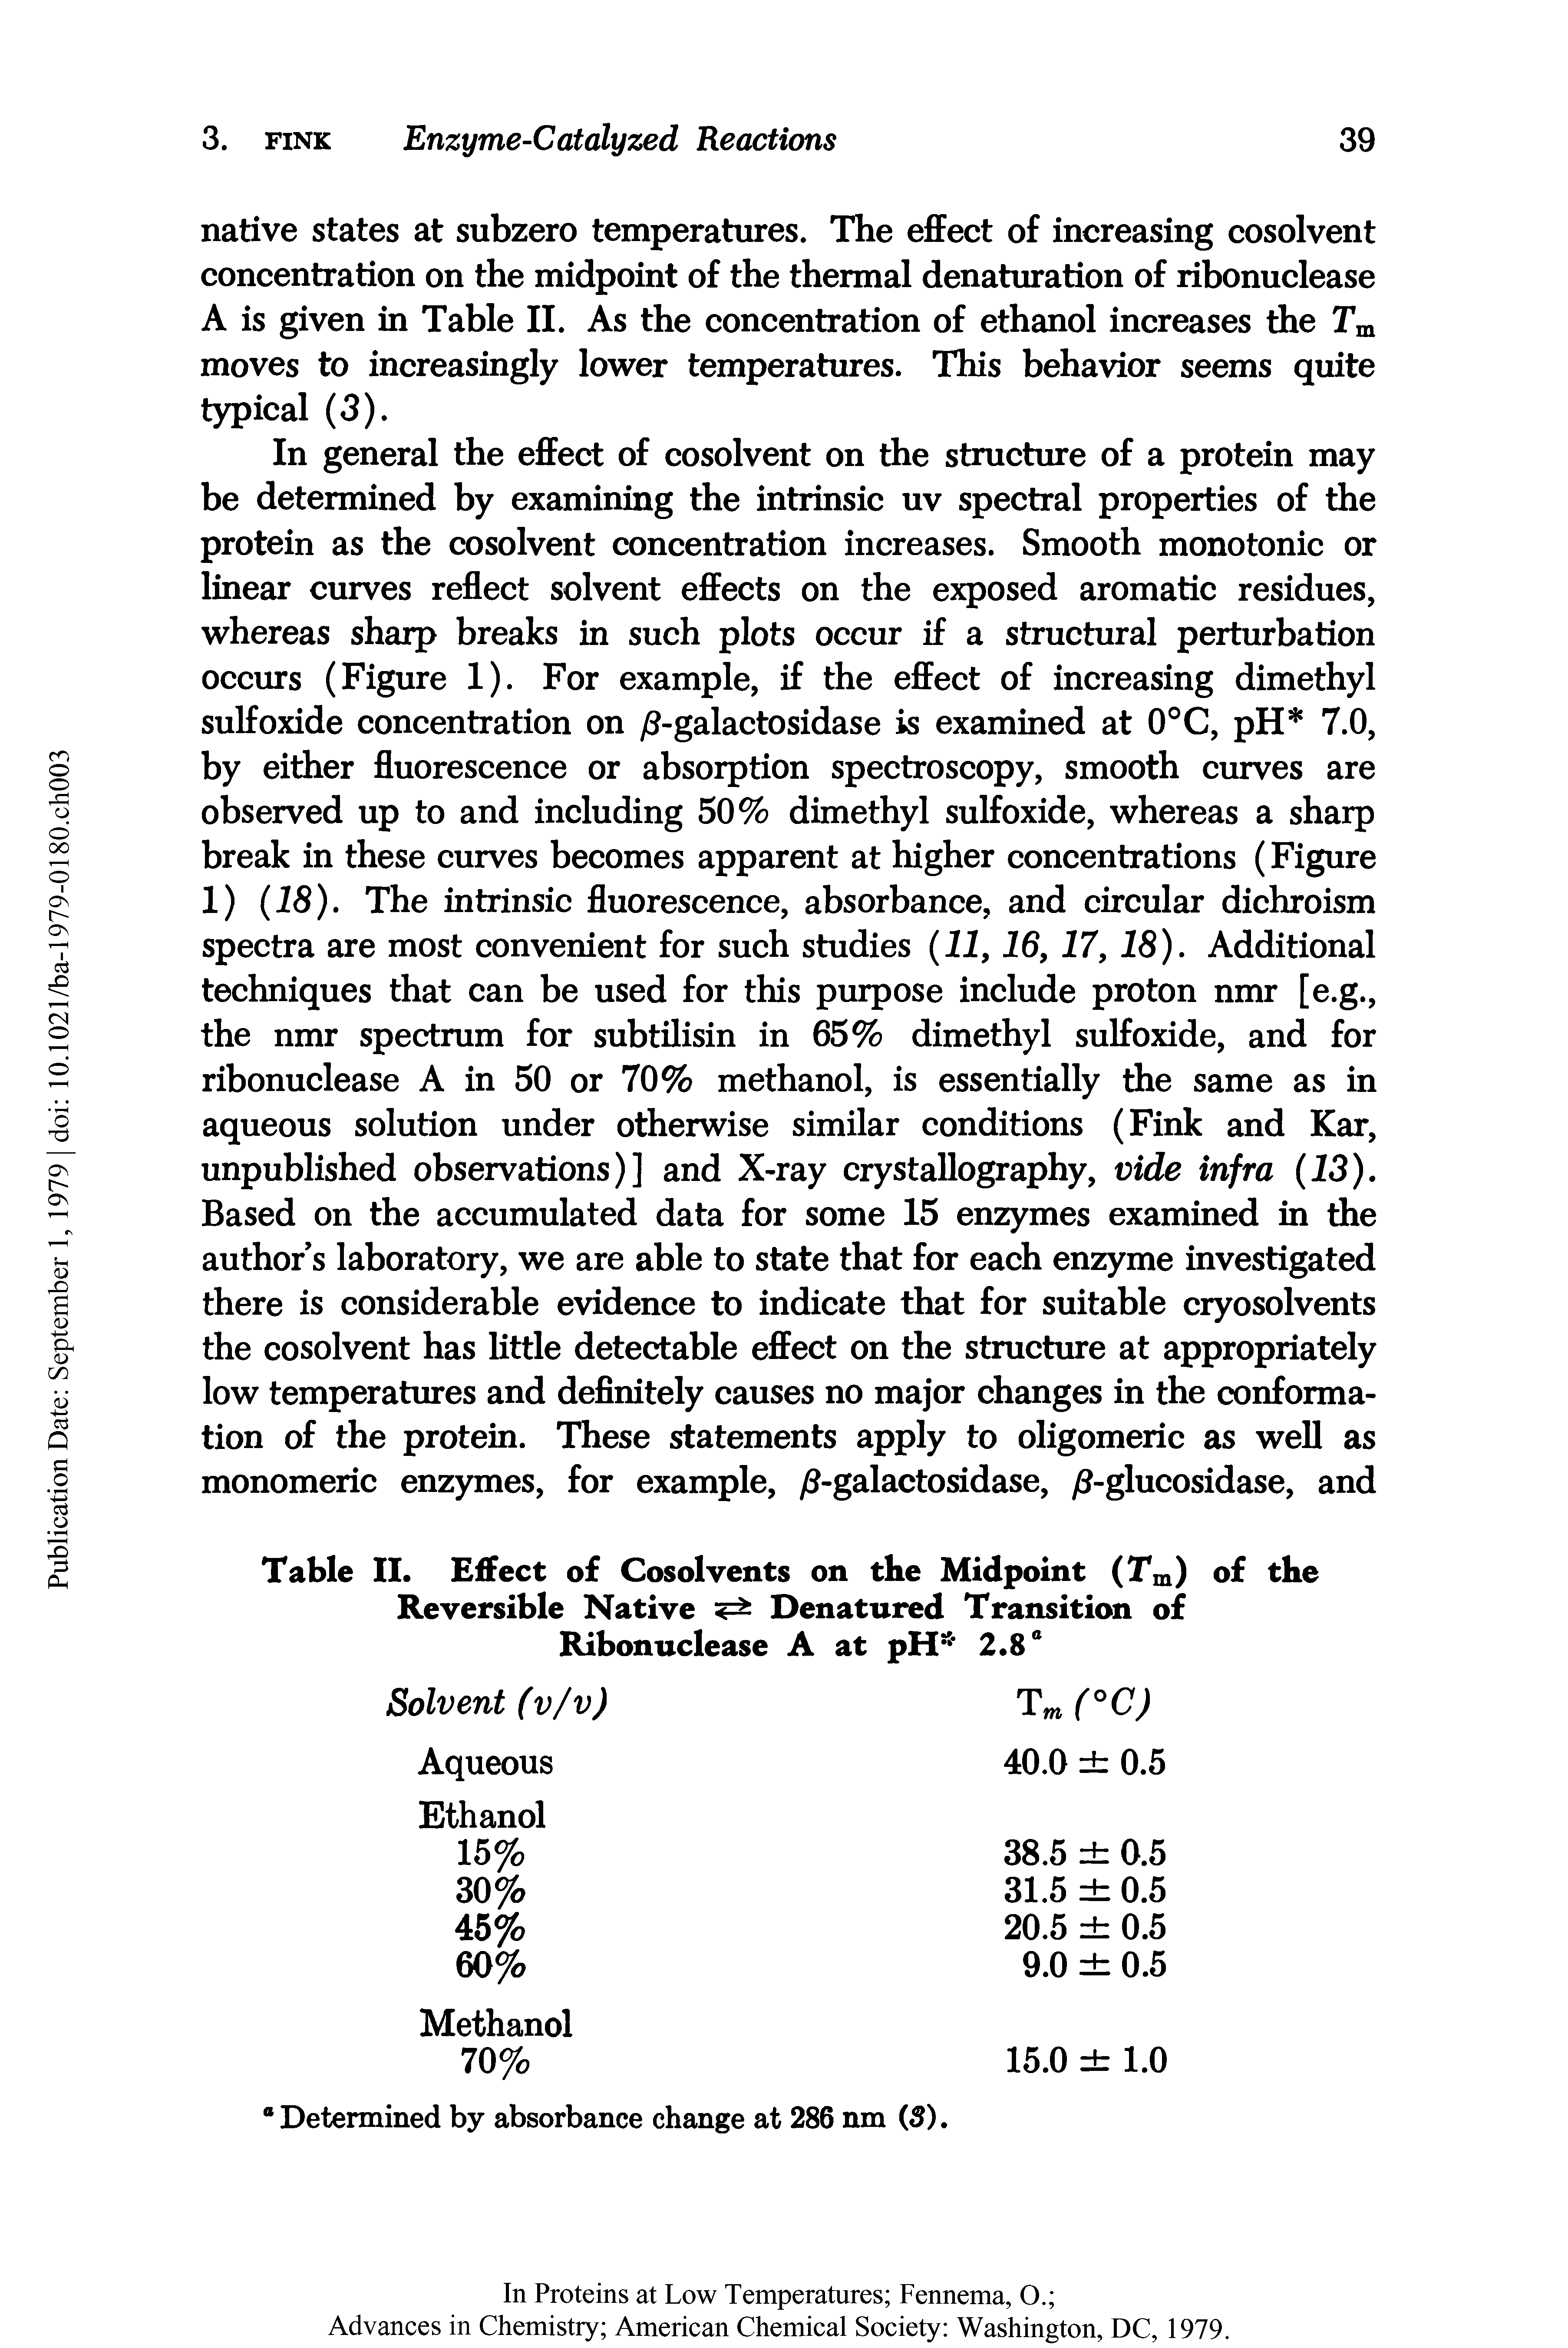 Table II. Effect of Cosolvents on the Midpoint (Tm) of the Reversible Native Denatured Transition of Ribonuclease A at pH4 2.8°...